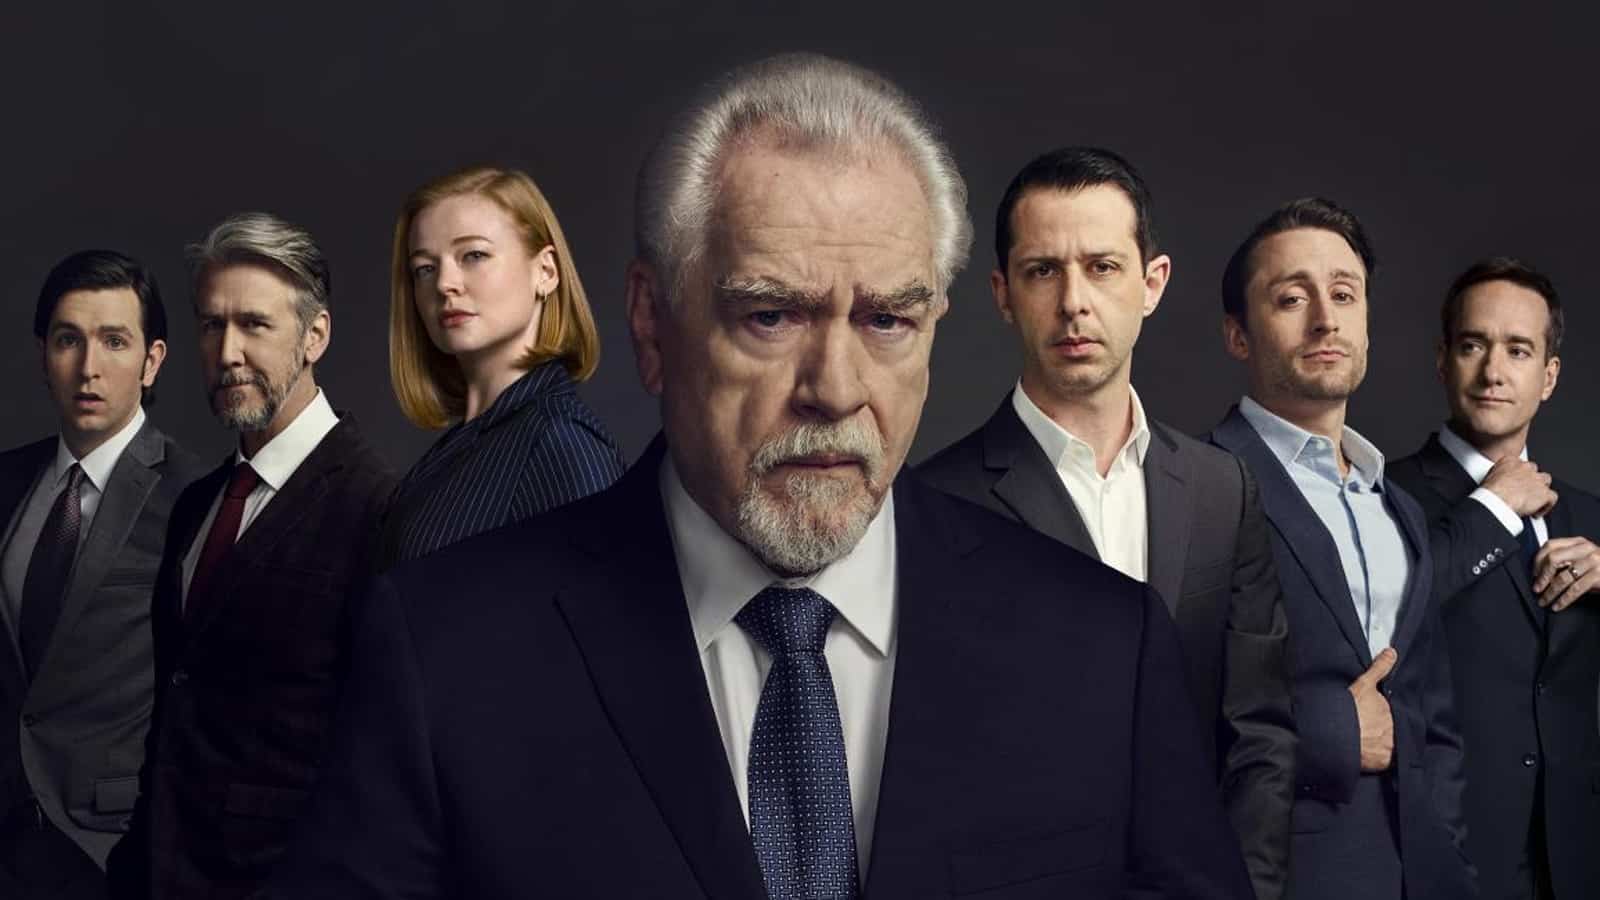 An image of the Succession cast